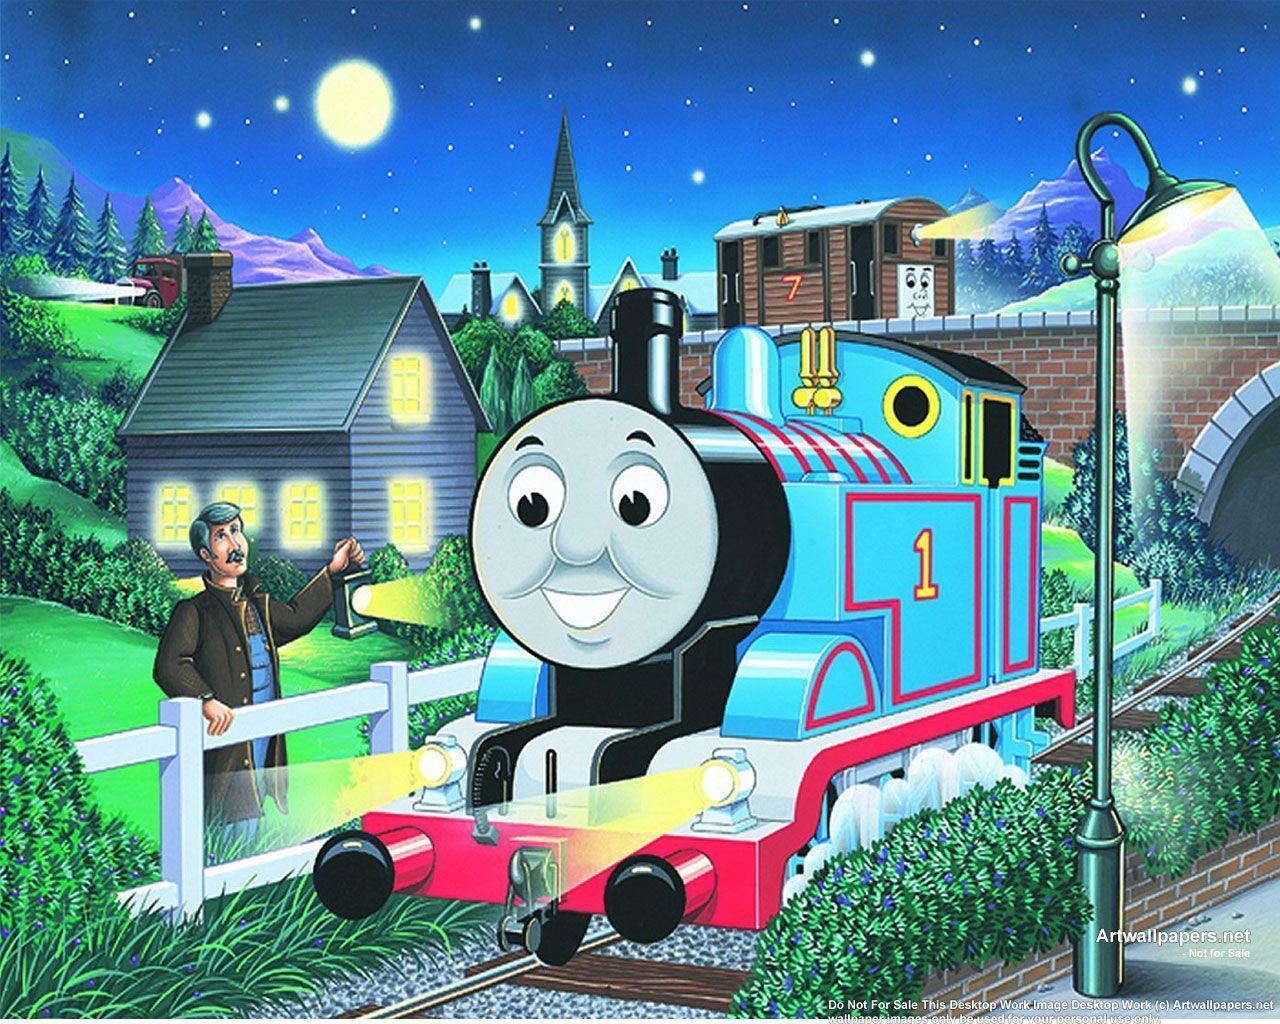 Thomas And Friends Wallpapers